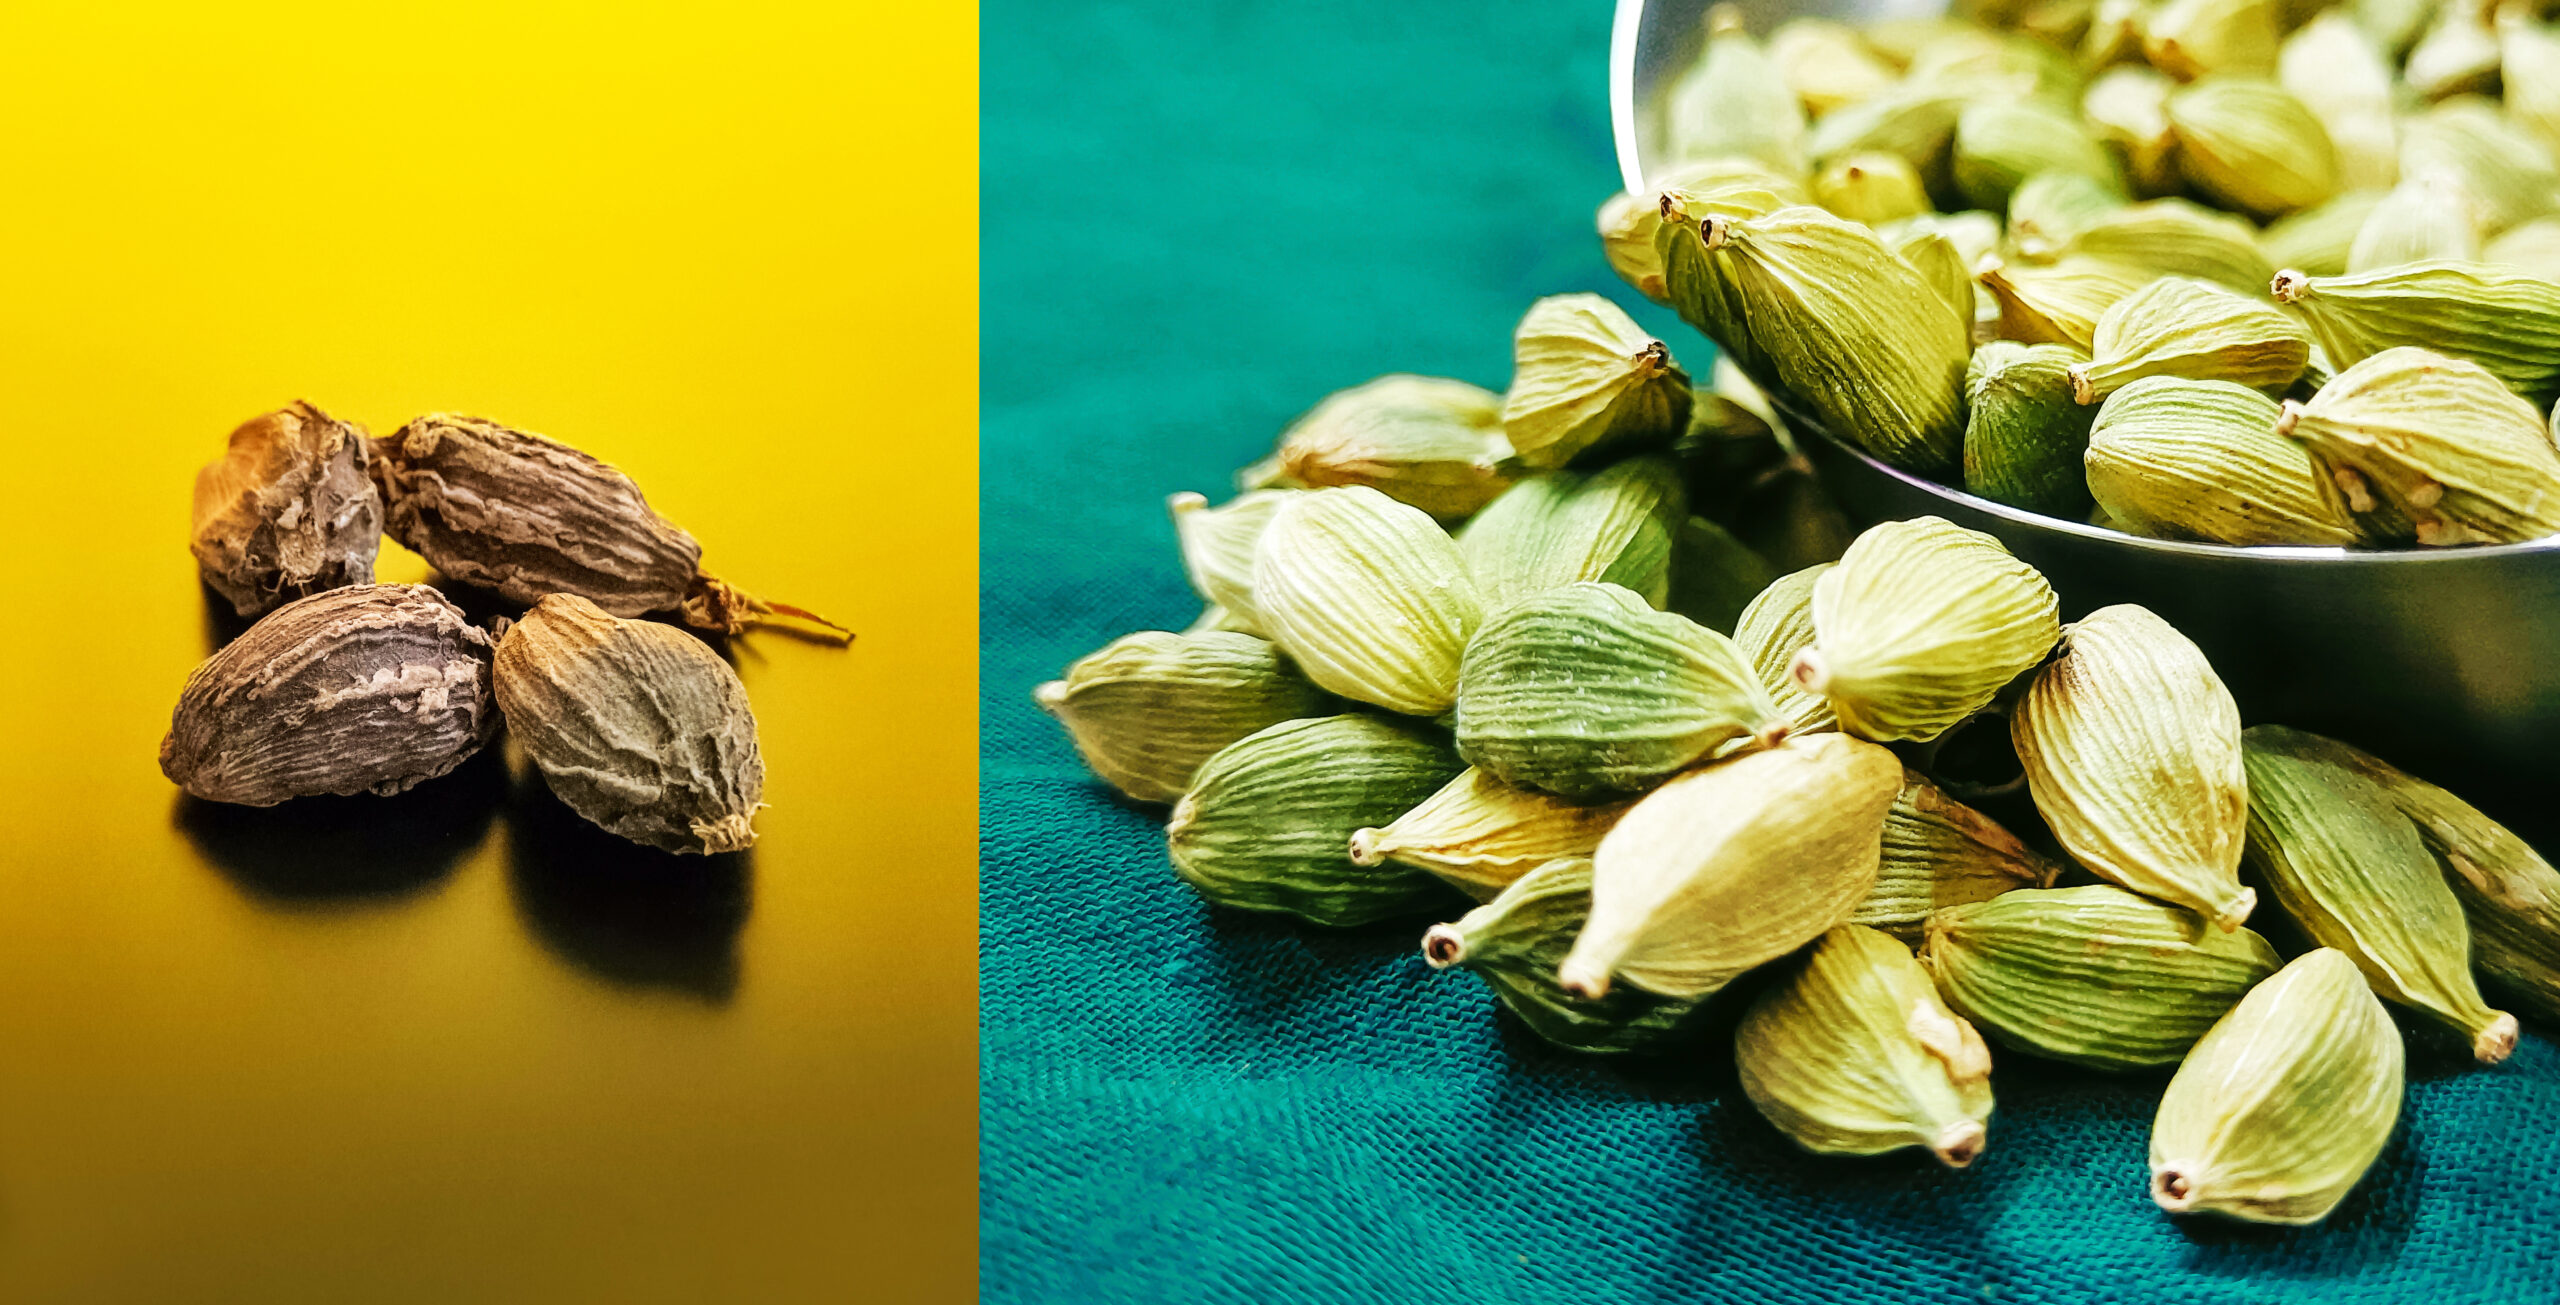 Cardamom: The Spice of Well-being